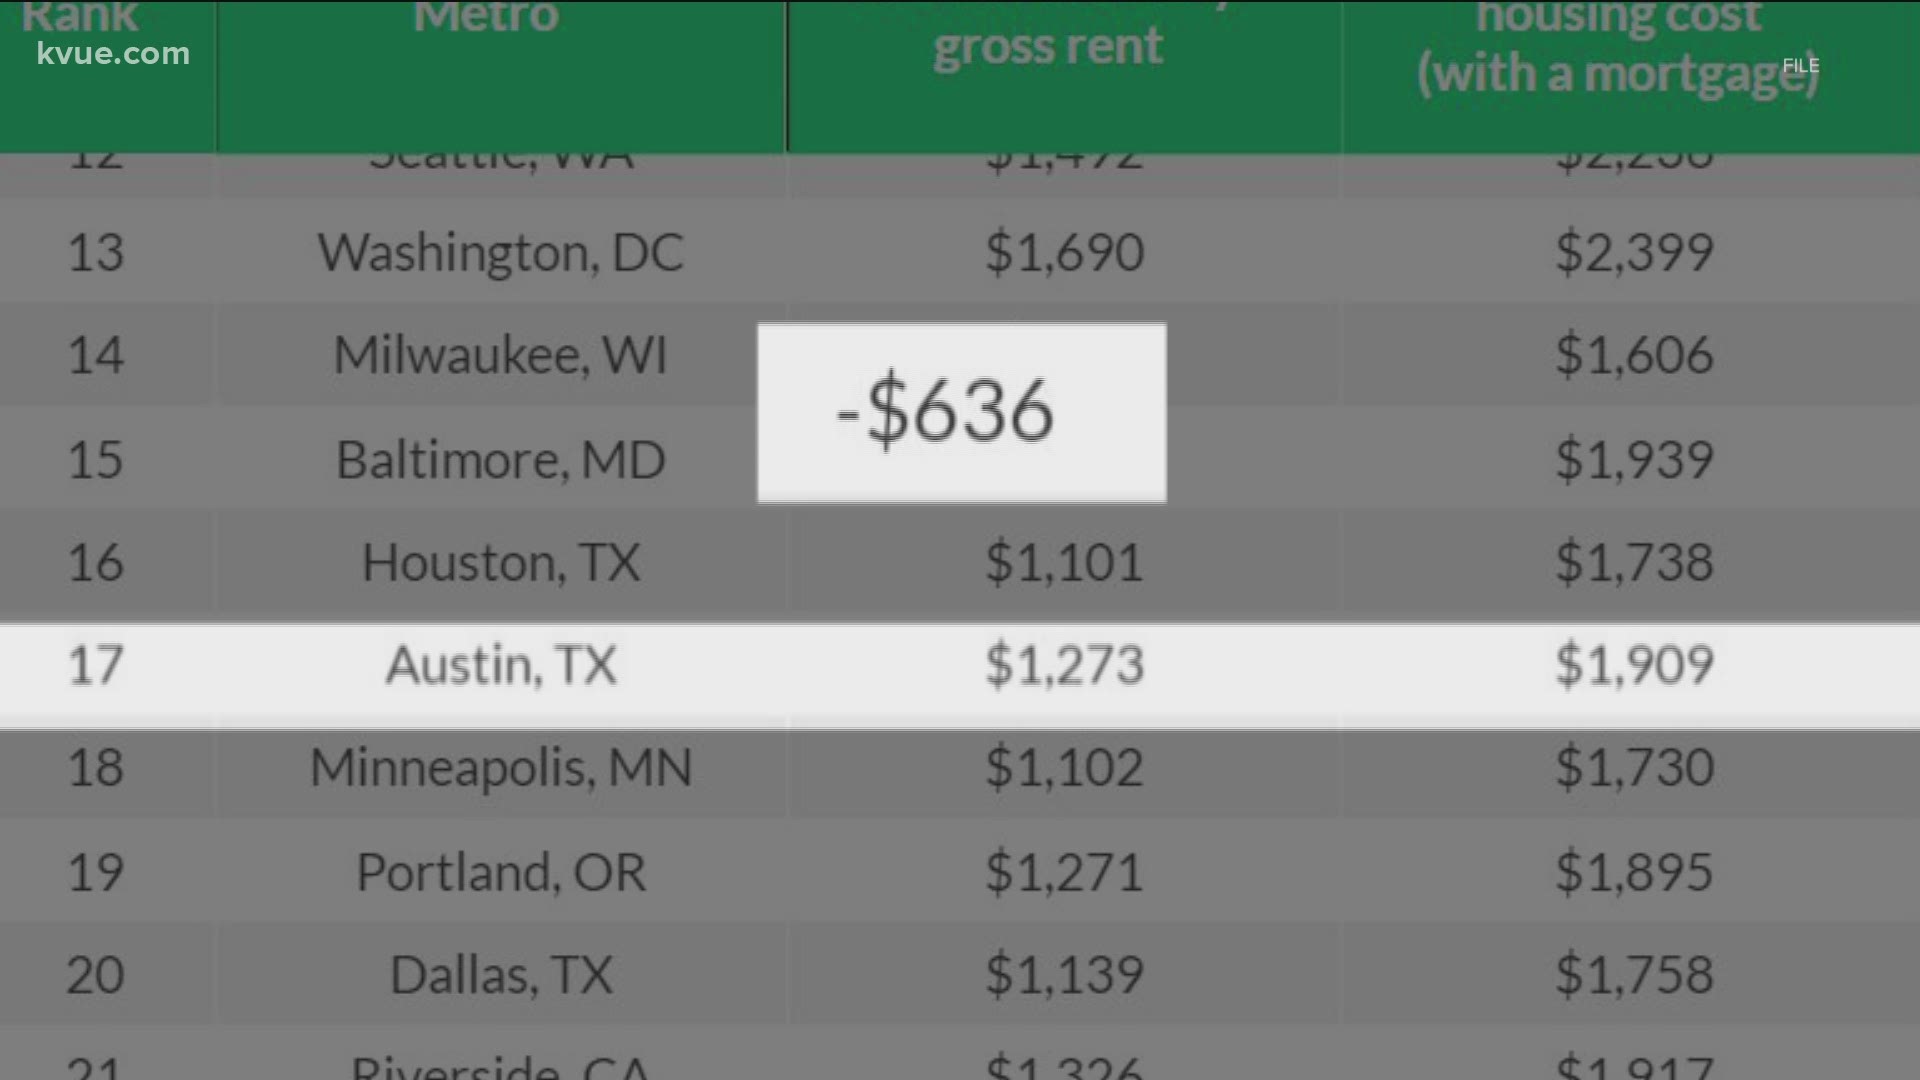 The Lending Tree study found that, on average, it is $636 less per month to rent a house than own one in Austin until the mortgage is paid off.